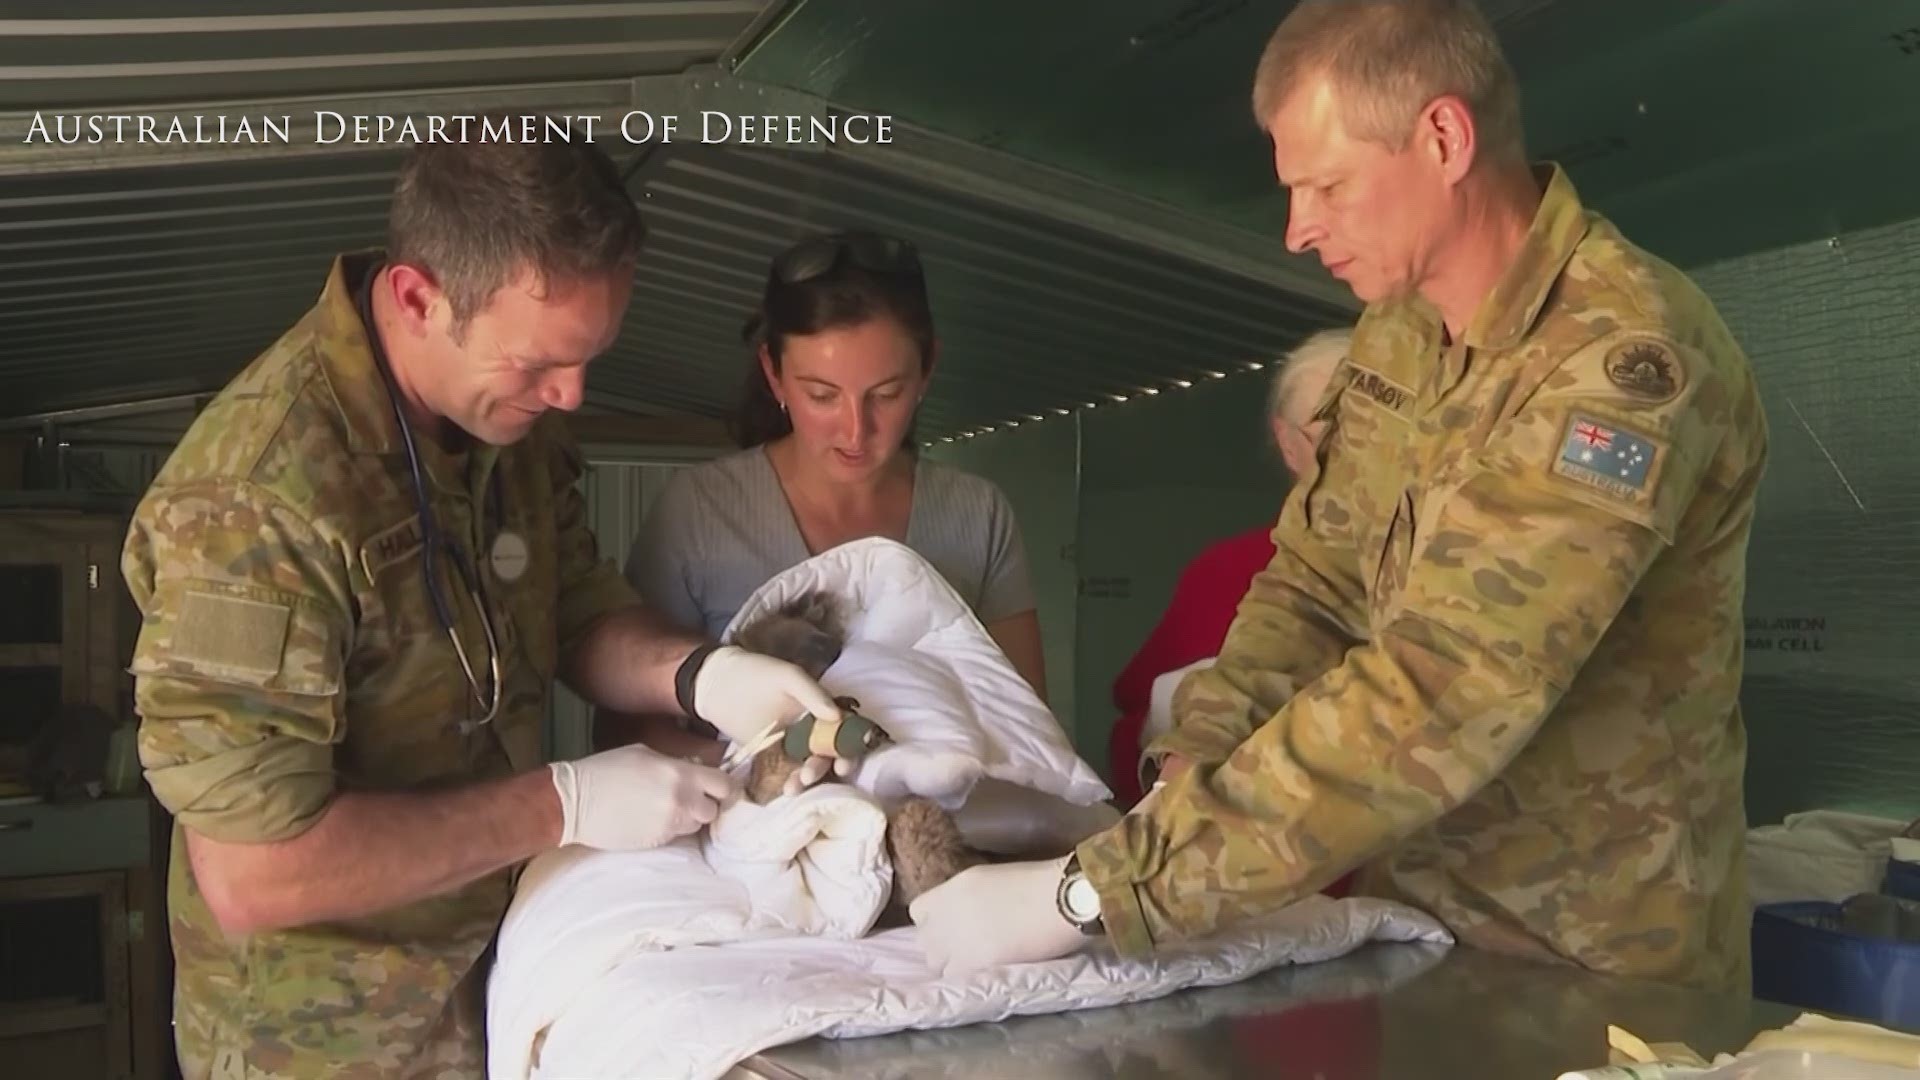 Captain Garnett Hall from the Australian army has been busy treating animals who have suffered burns at the Kangaroo Island Wildlife park. (AP)